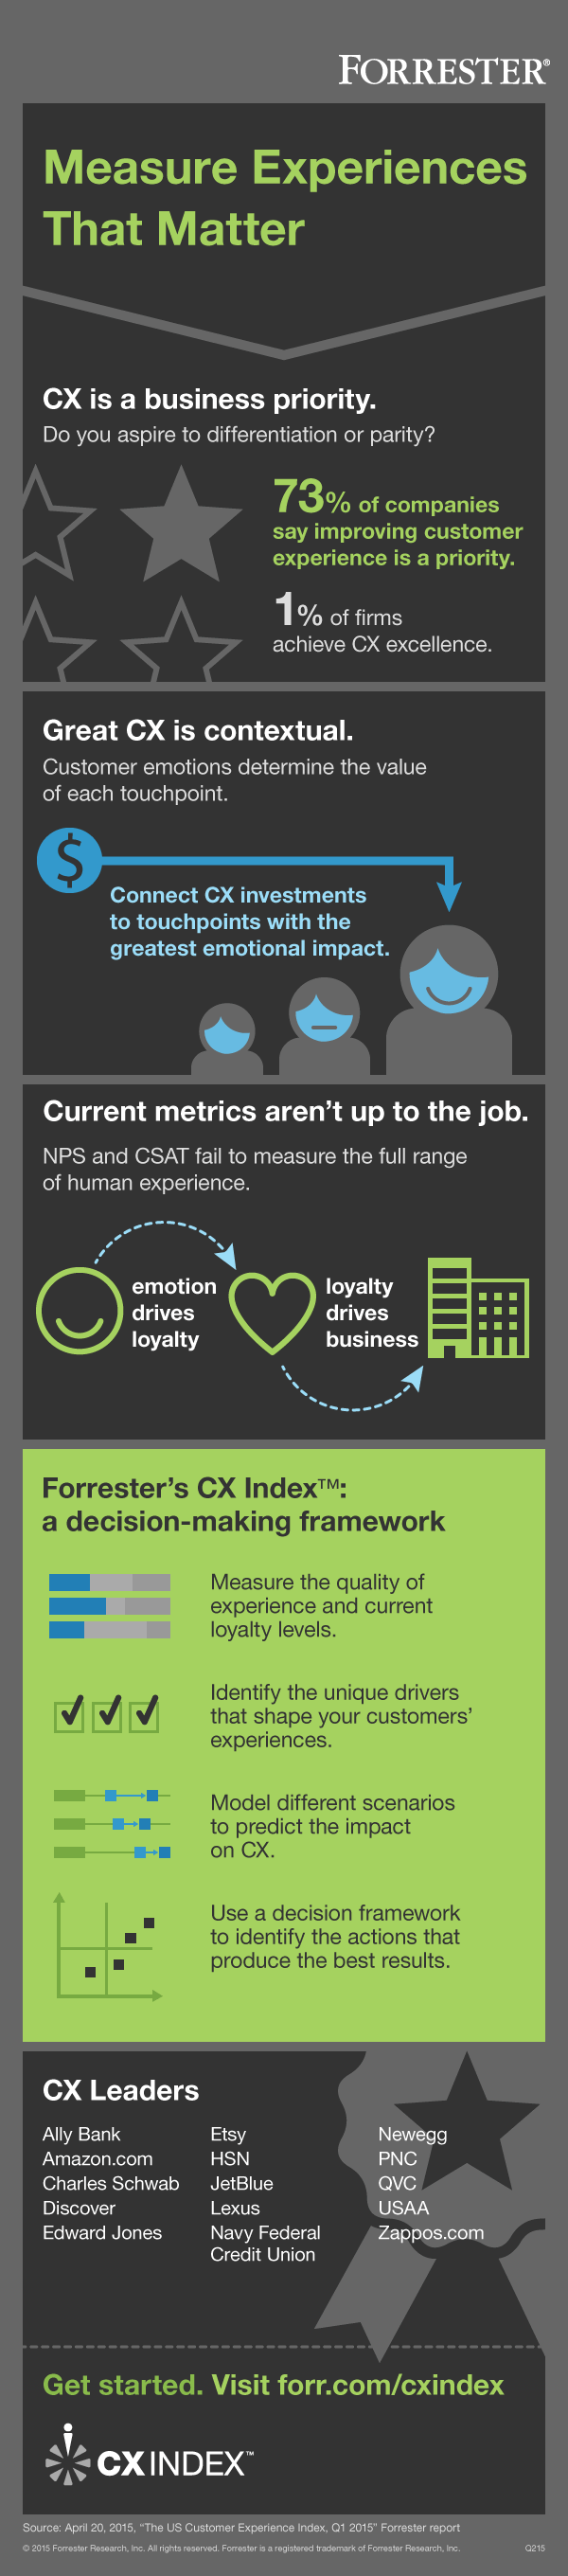 Forrester customer experience measurement infographic - NPS and CSAT not enough - more about the CX Index